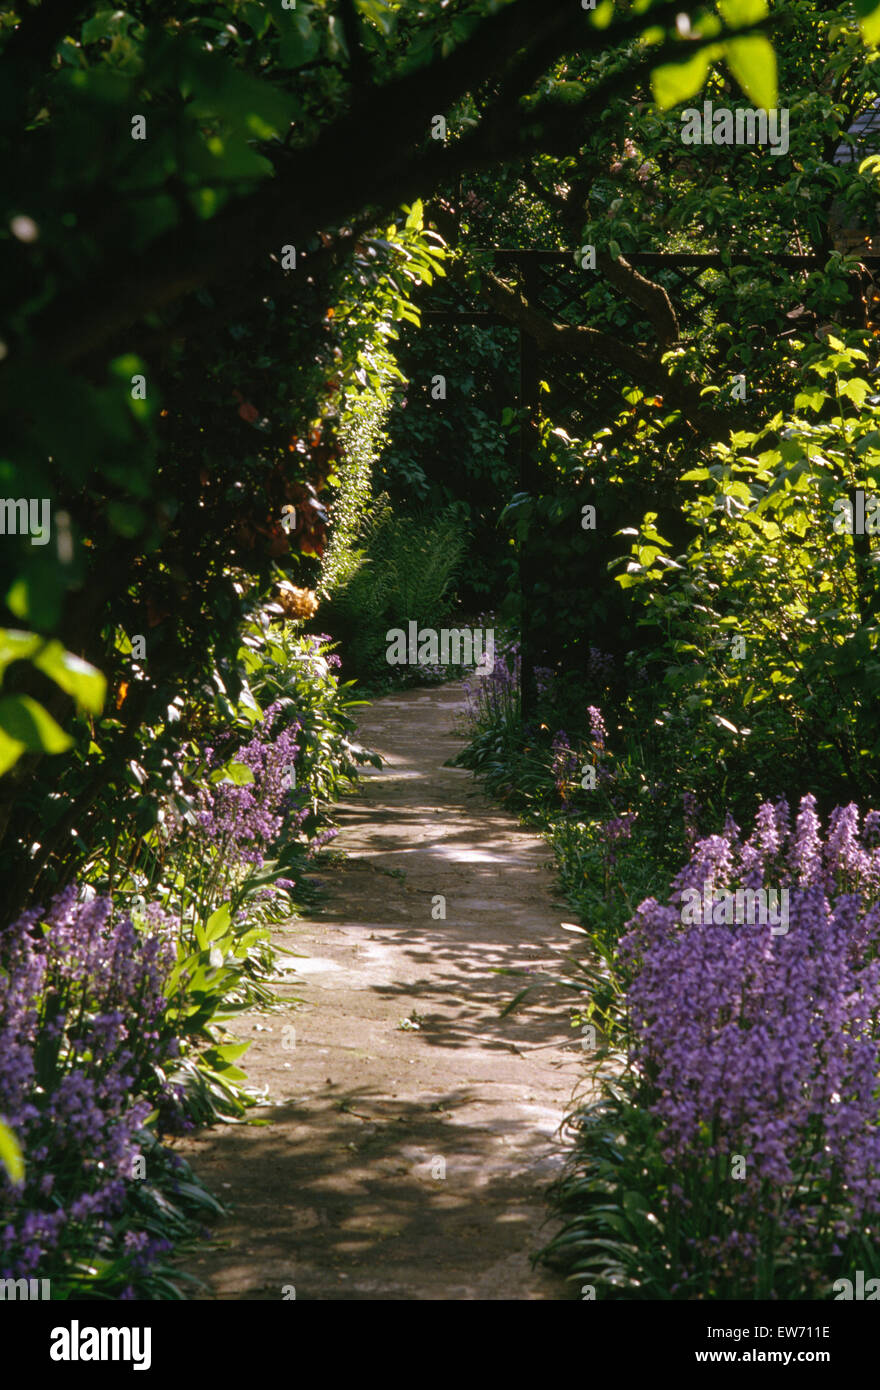 Stone path through borders with bluebells in country garden in spring Stock Photo